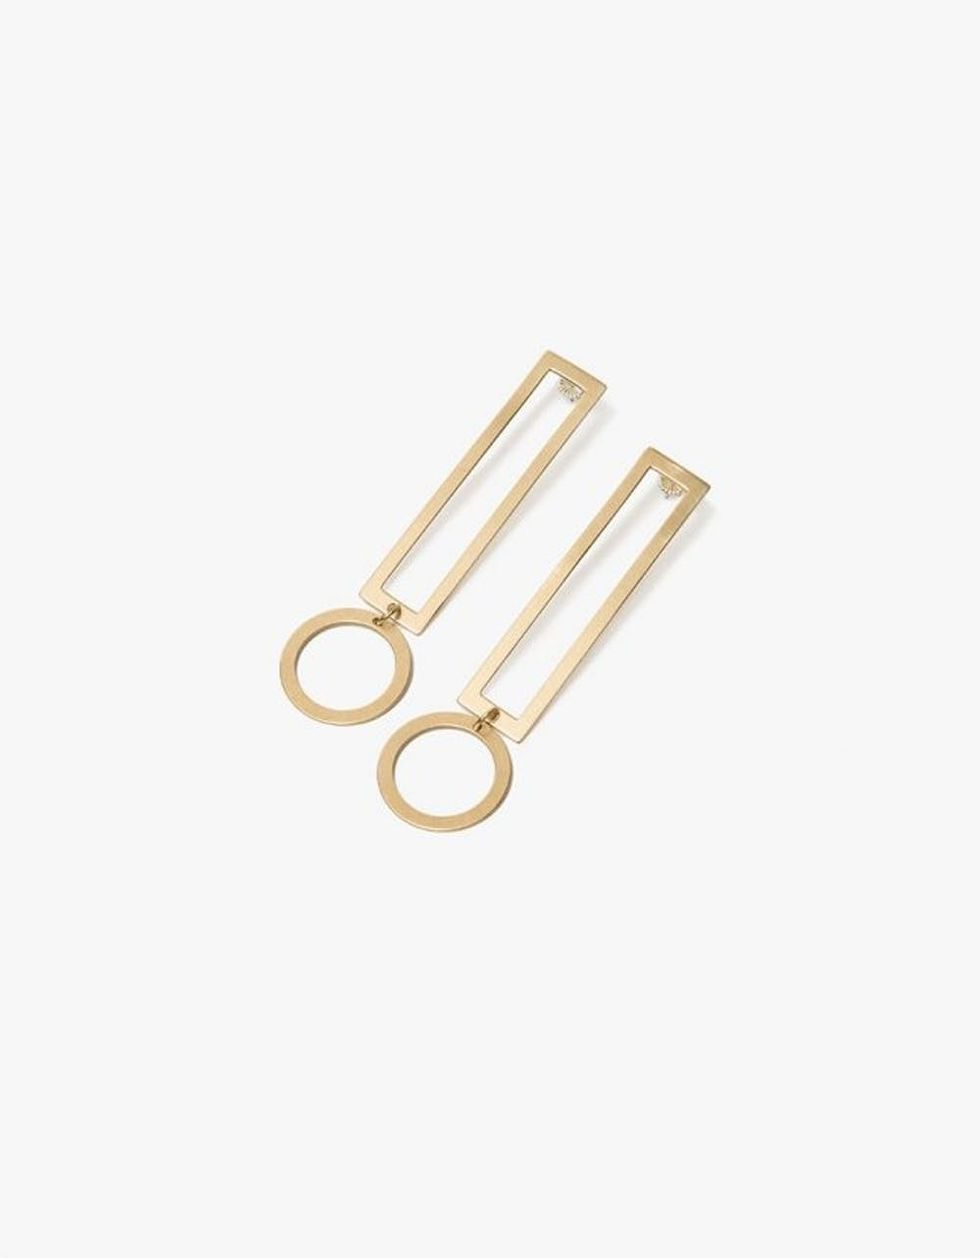 22 Sculptural Earrings That Instantly Upgrade Your Look - Brit + Co